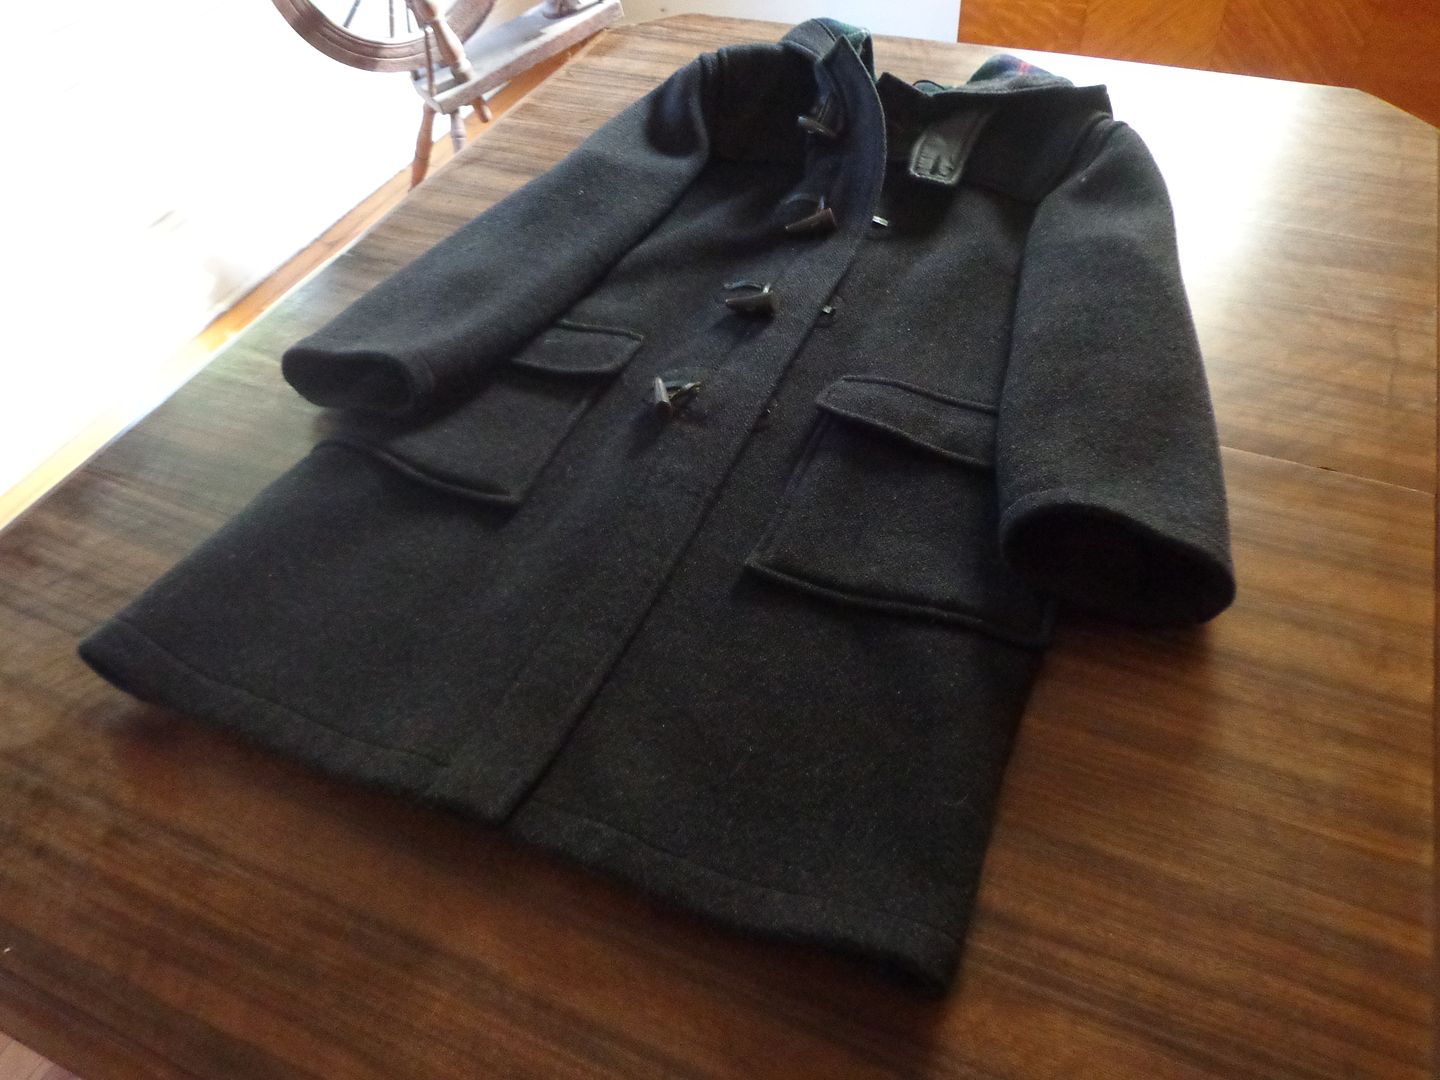 Sz 44 GLOVERALL Duffle Coat. MADE IN ENGLAND. Dark Charcoal w